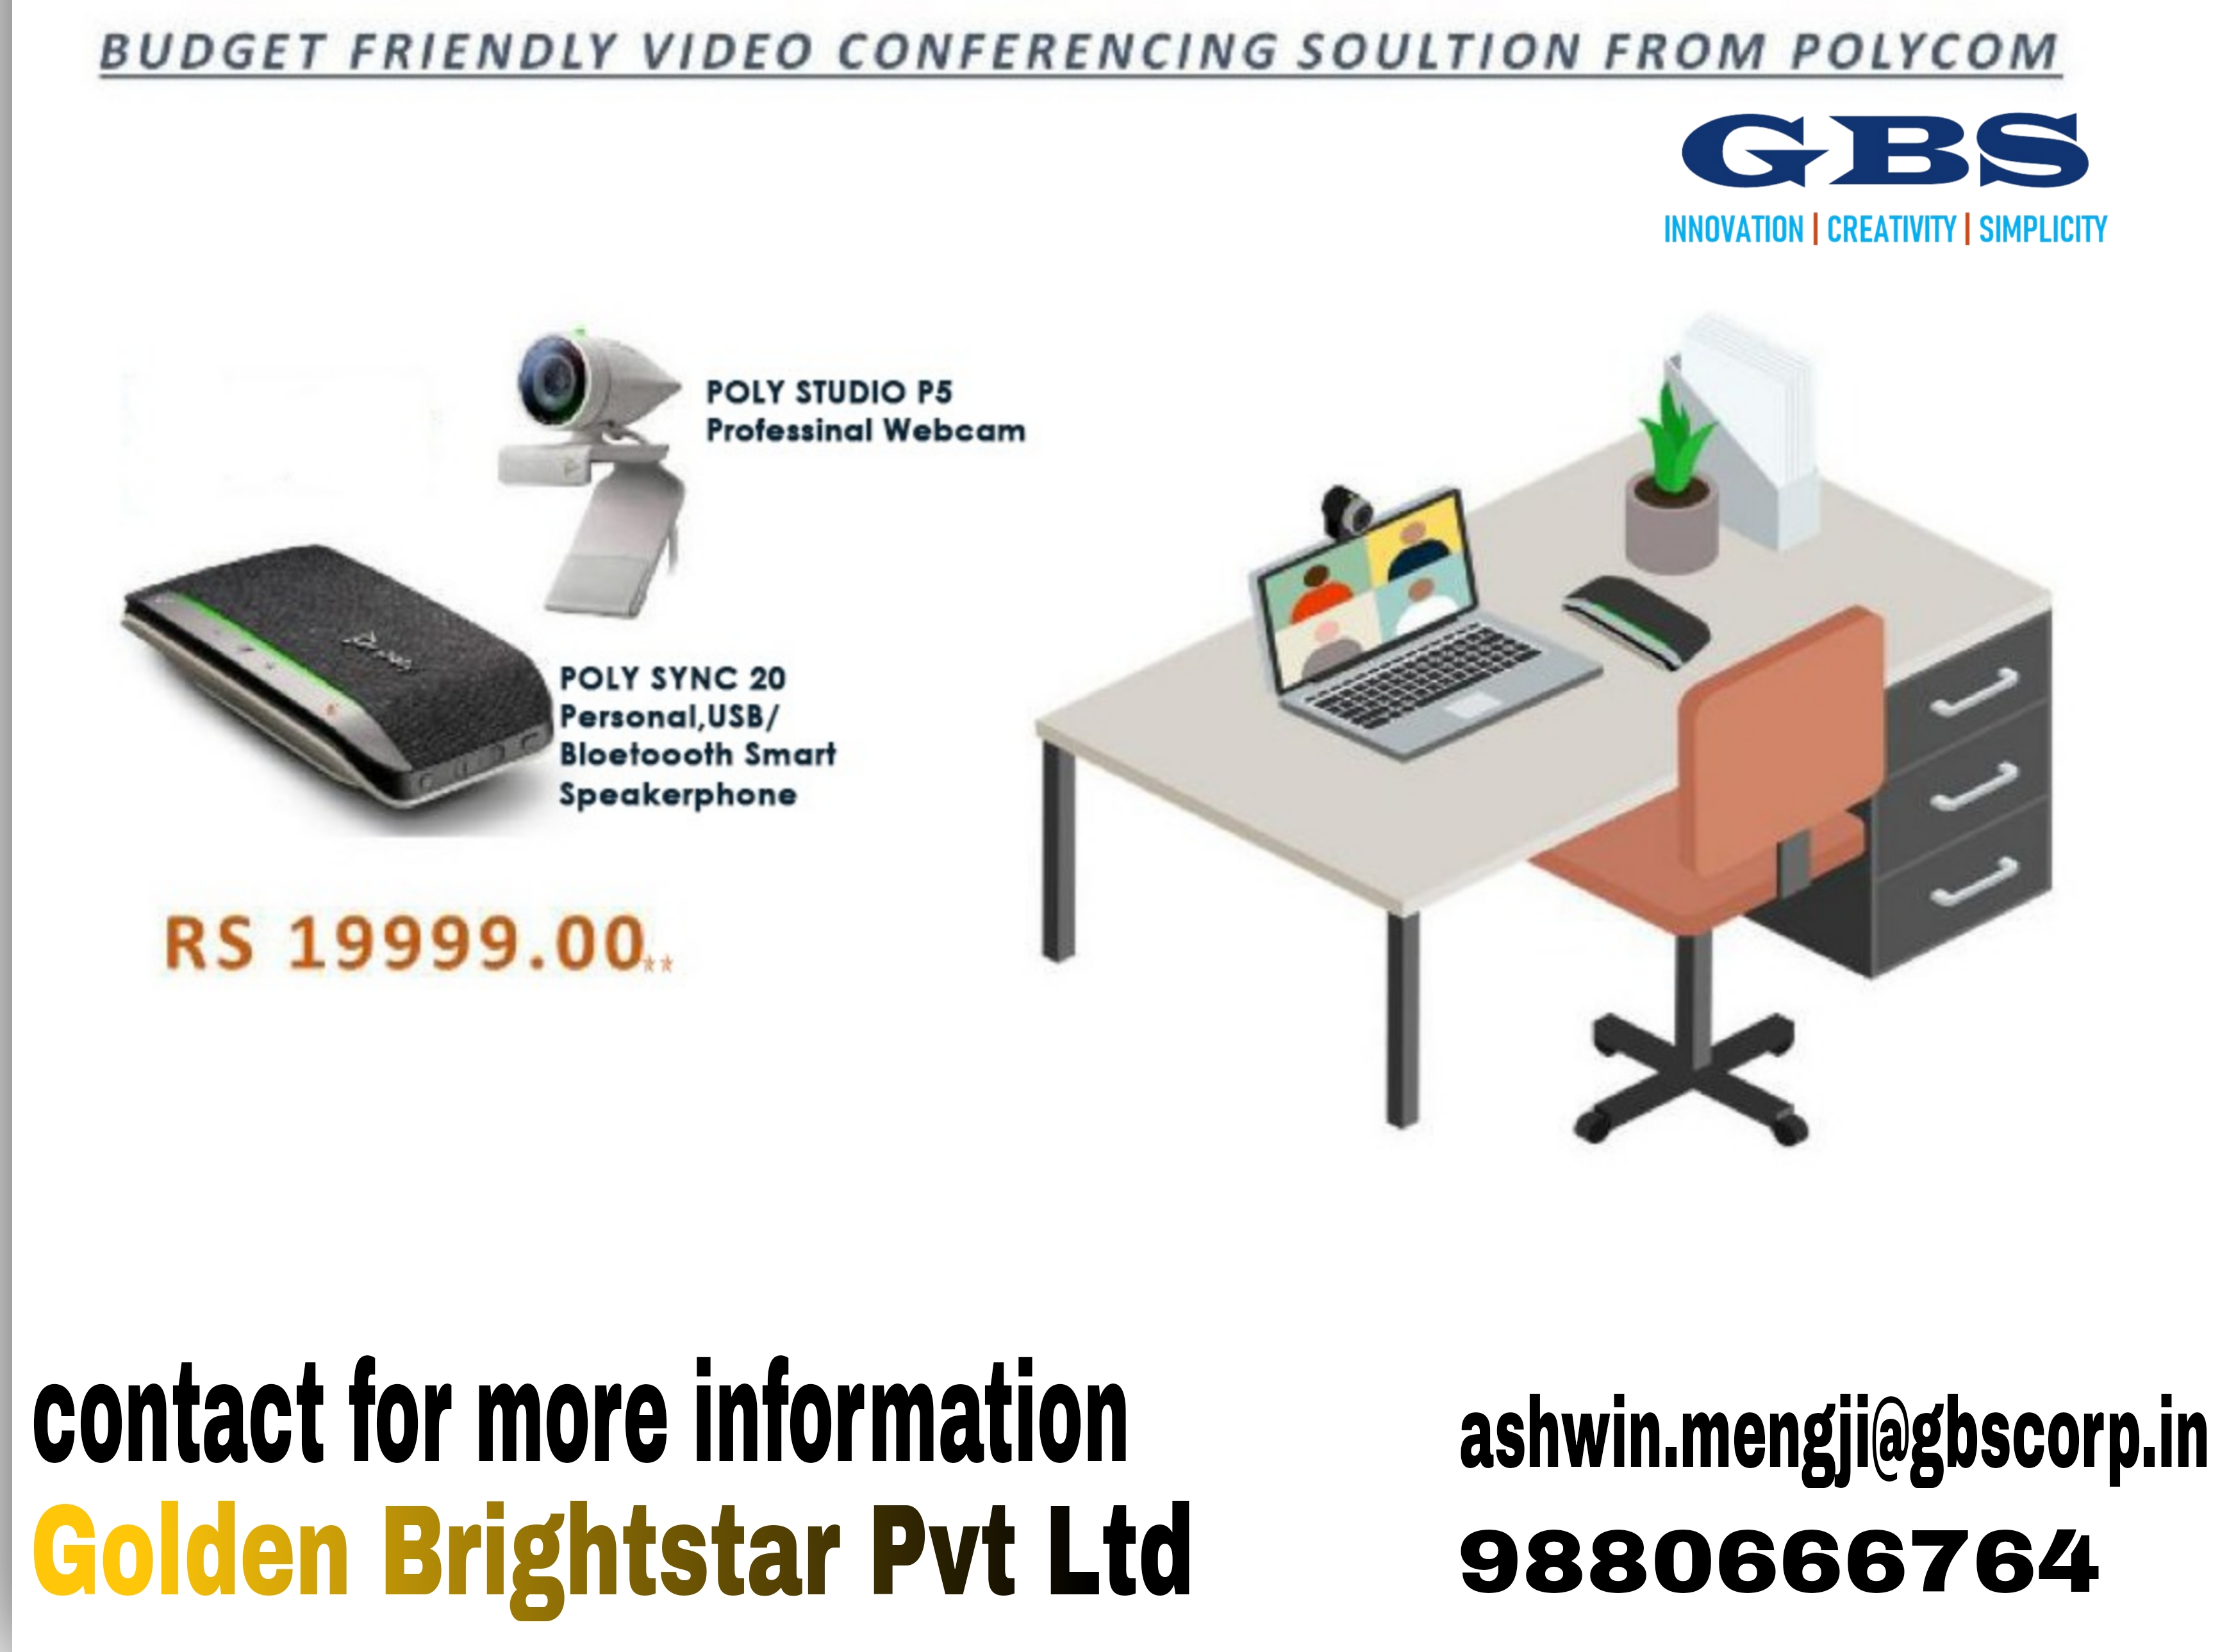 Budget-Friendly Video Conferencing Solution